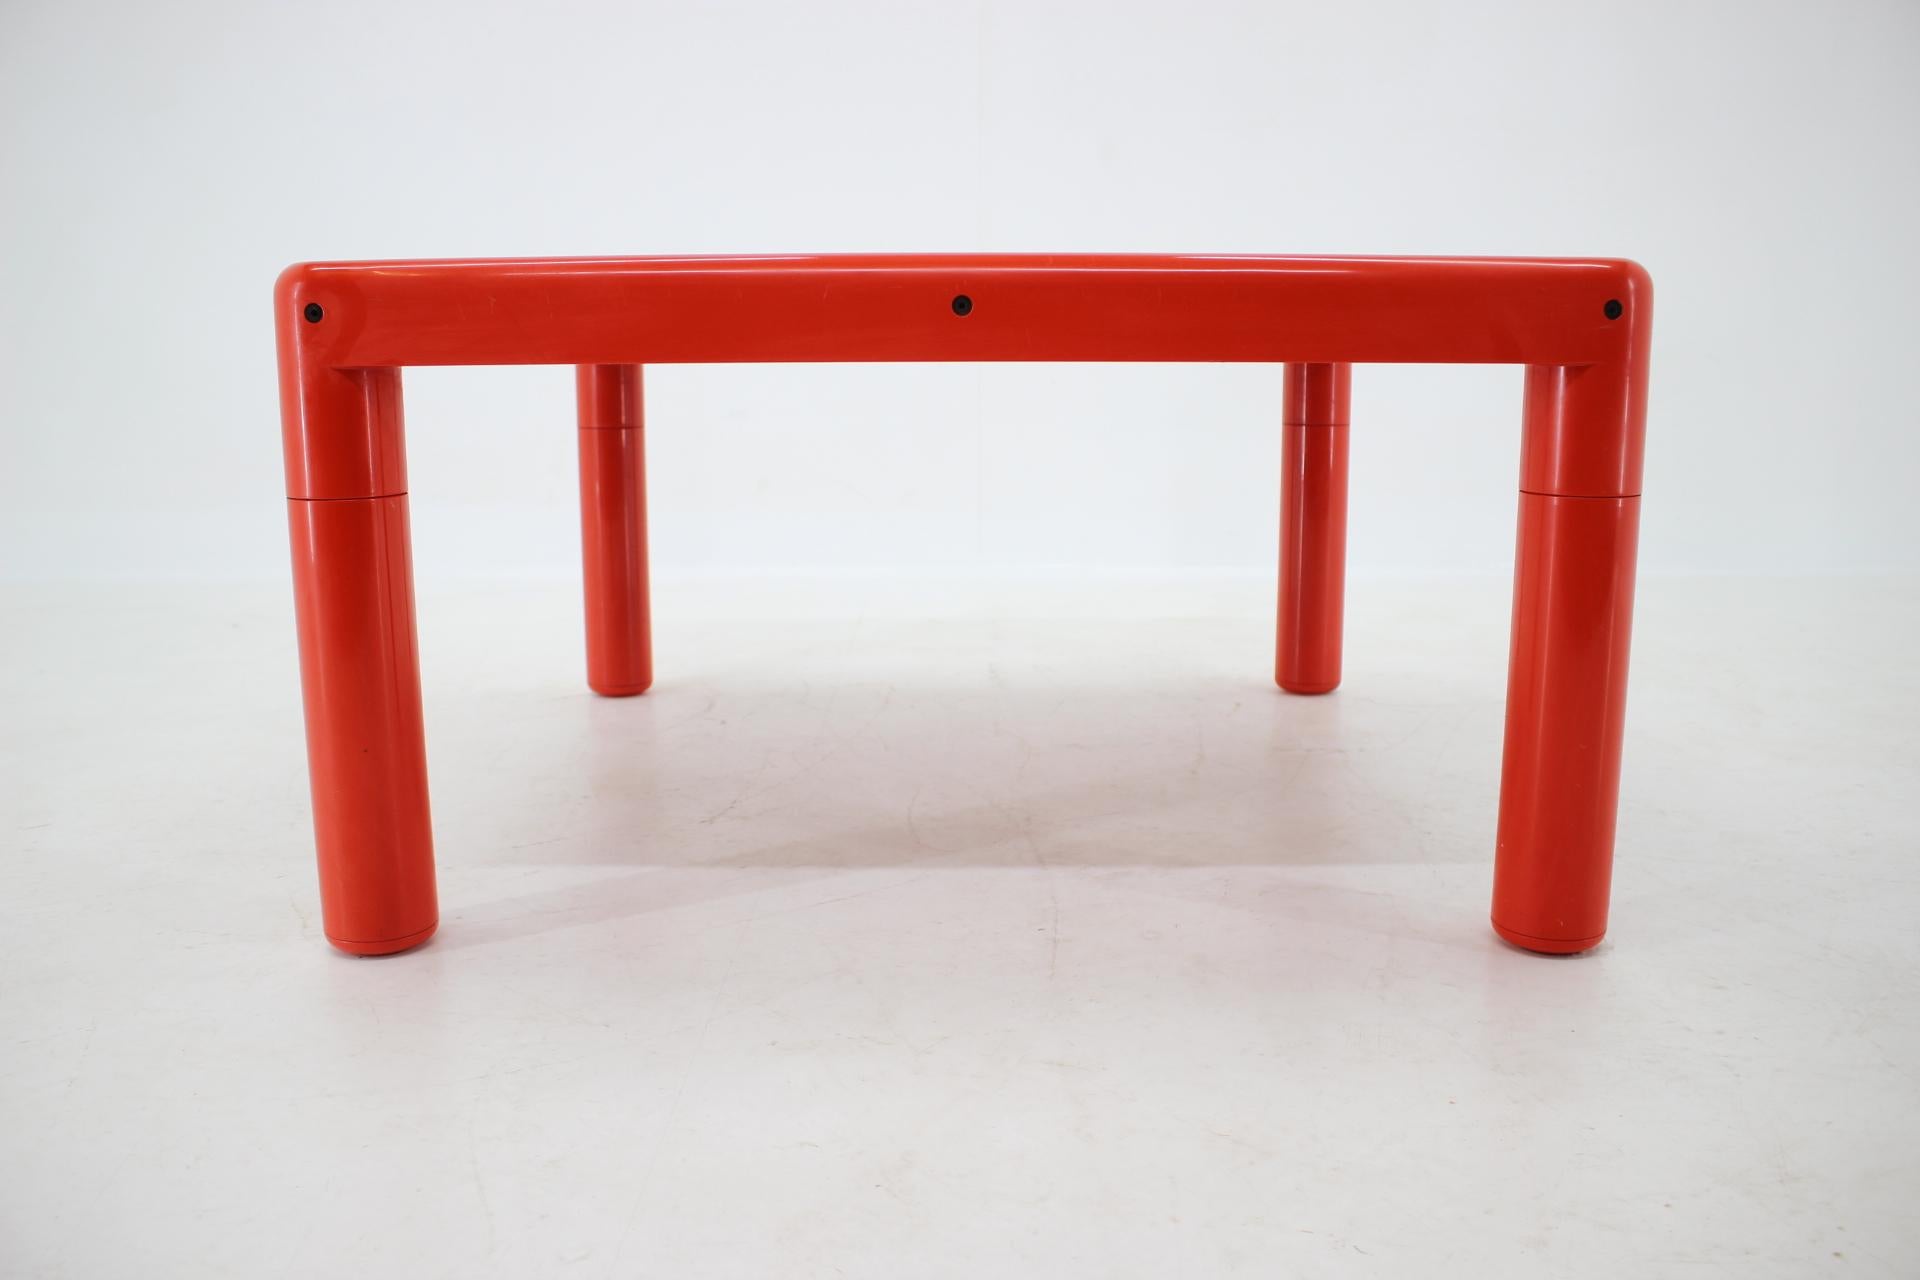 Midcentury Space Age Coffee Table UPO, Eero Aarnio, Finland, 1970s For Sale 3